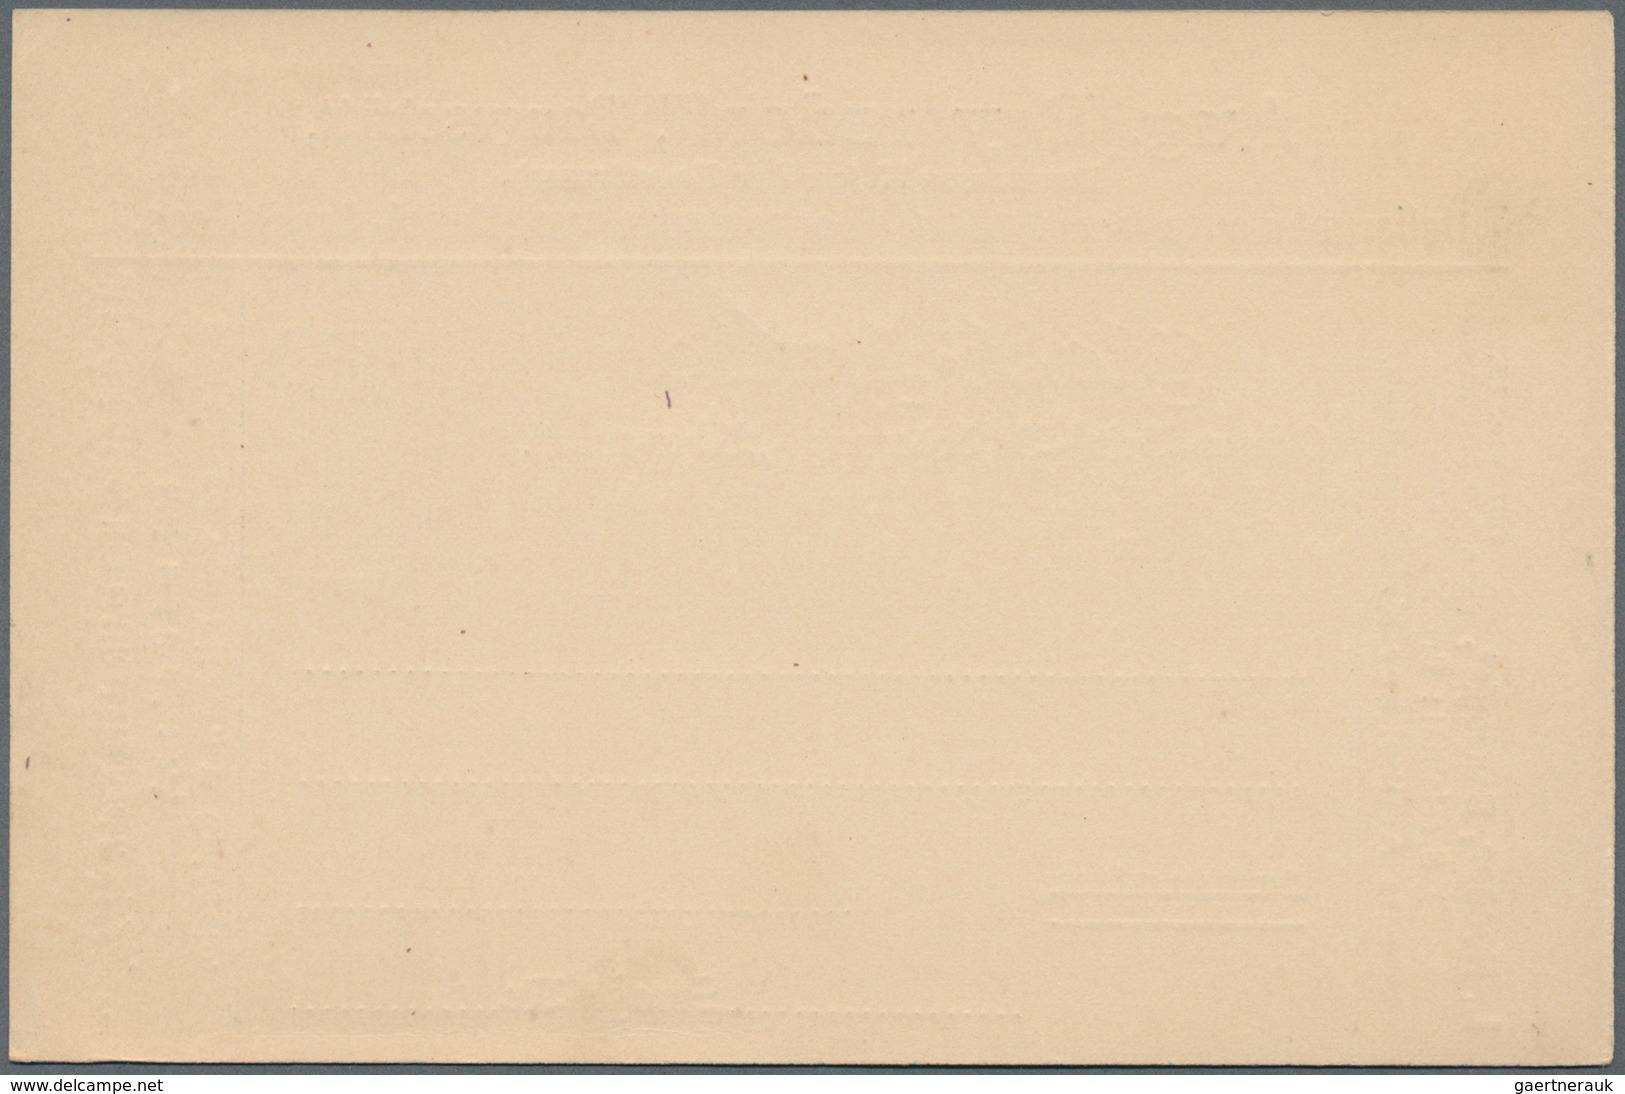 Thematik: Anzeigenganzsachen / Advertising Postal Stationery: 1895 (ca.), German Reich. Private Ad P - Unclassified